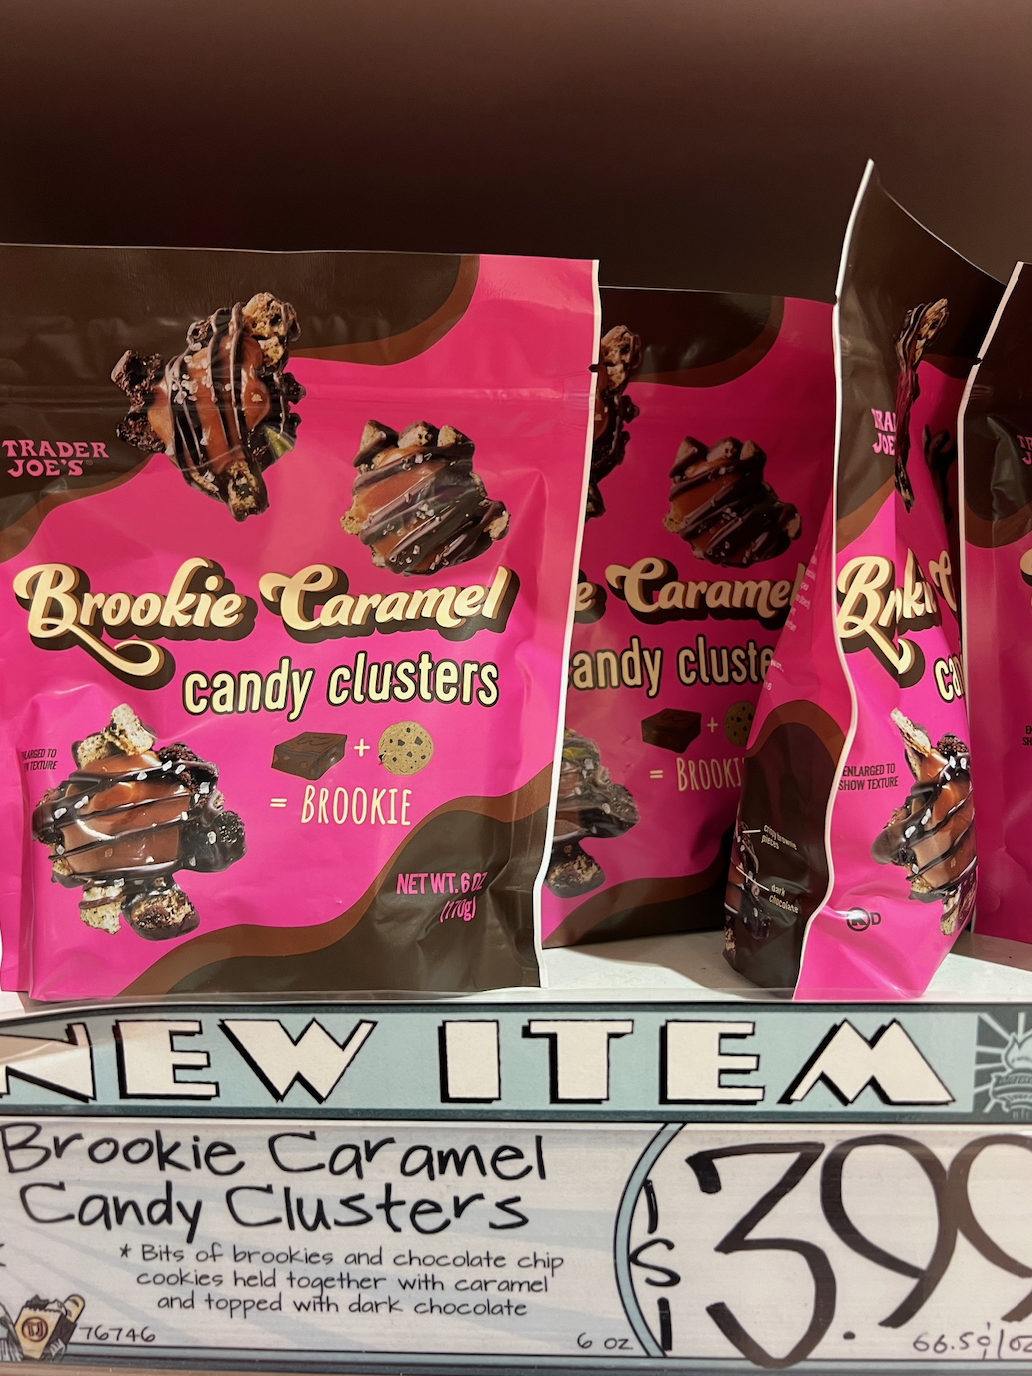 New item on shelf, &quot;Brookie Caramel Candy Clusters,&quot; chocolate treats with packaging featuring dessert images; price tag below reads &quot;$3.99&quot;